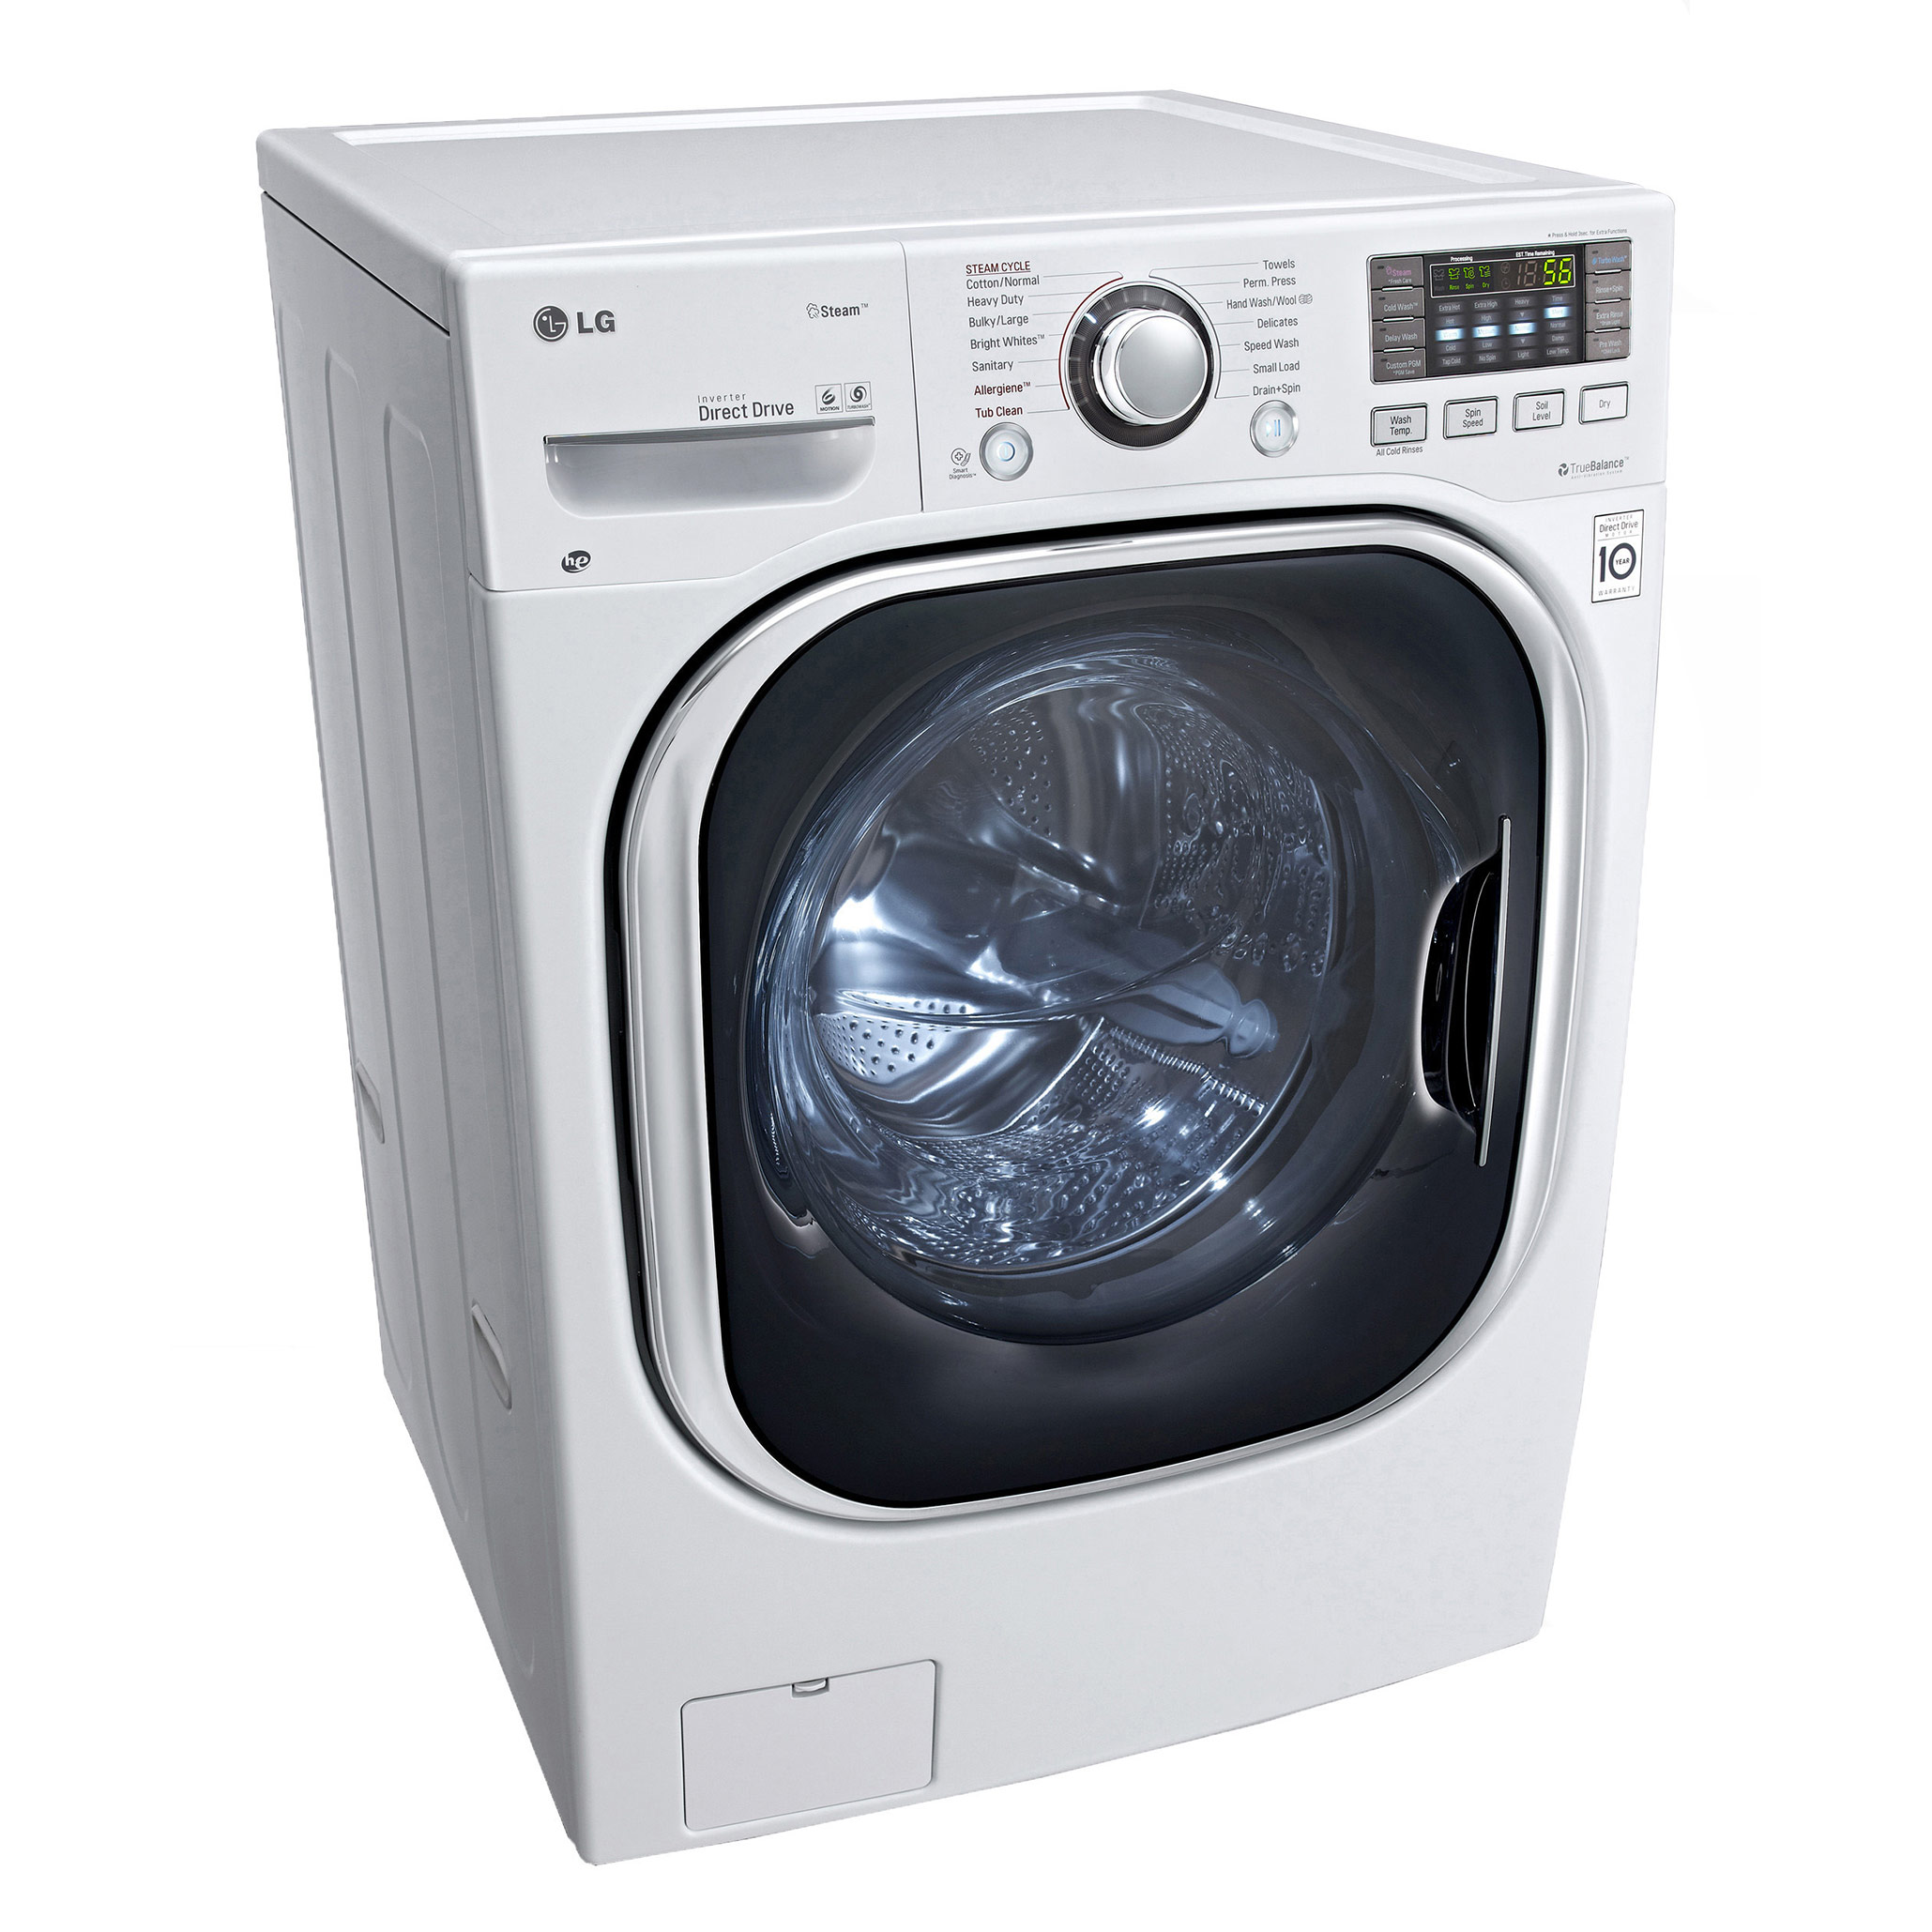 LG WM3997HWA | All in One Washer Dryer Combo | LGWasherDryer.com All In One Washer And Dryer Combo Reviews